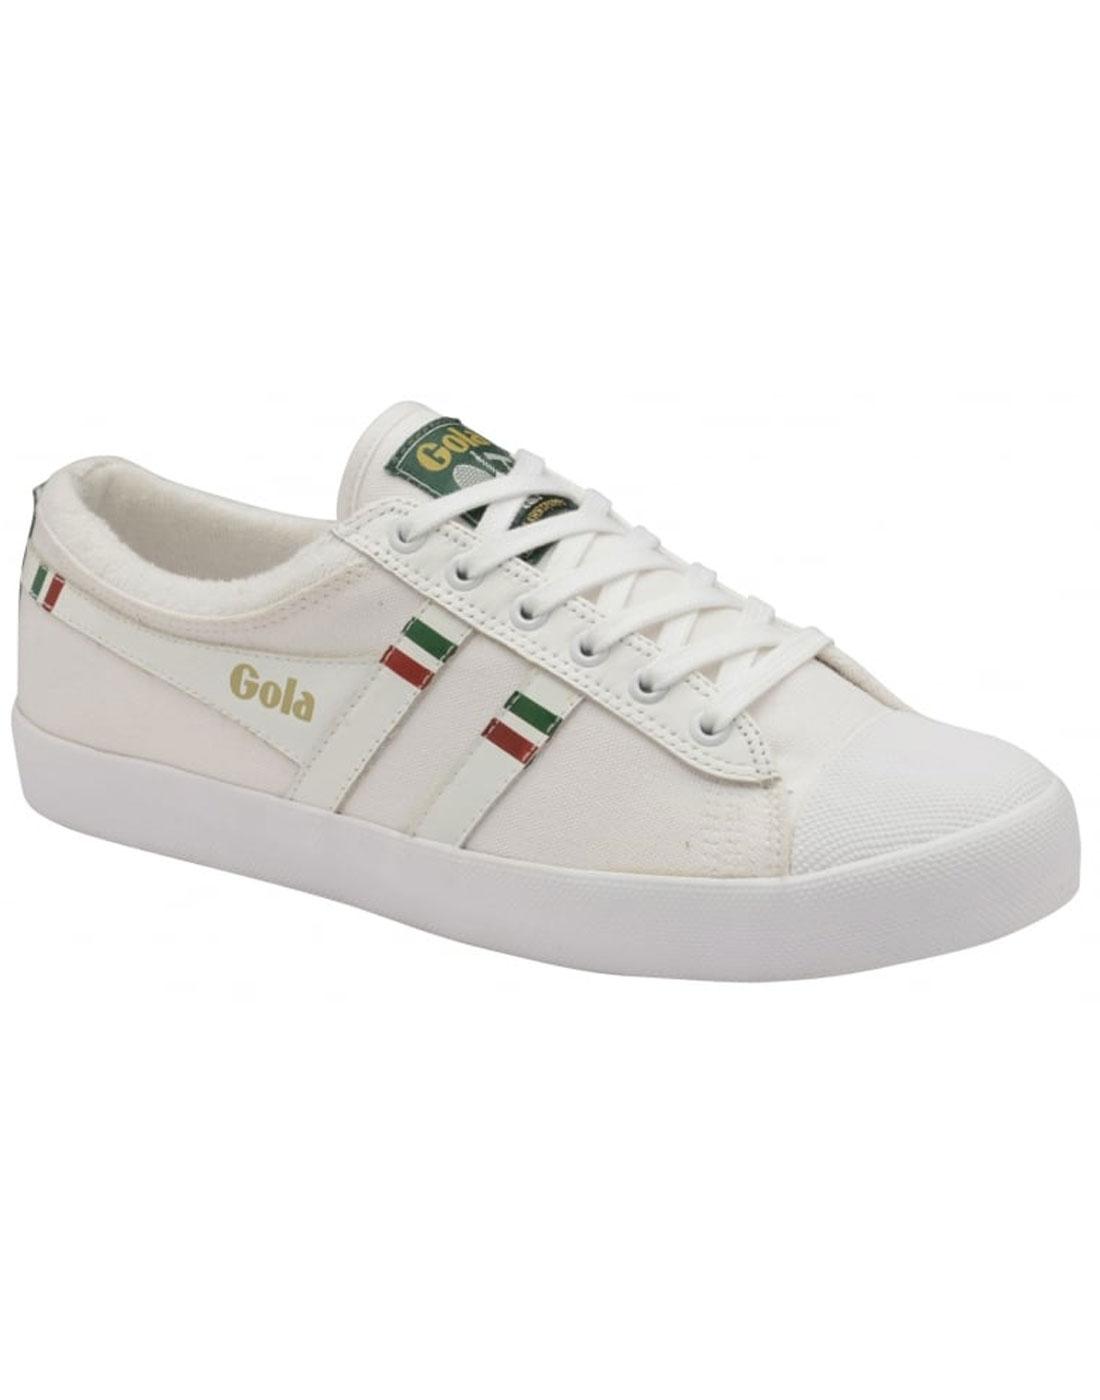 Trainers GOLA Women's Lawn Sports White Canvas Sneakers UK 5 6